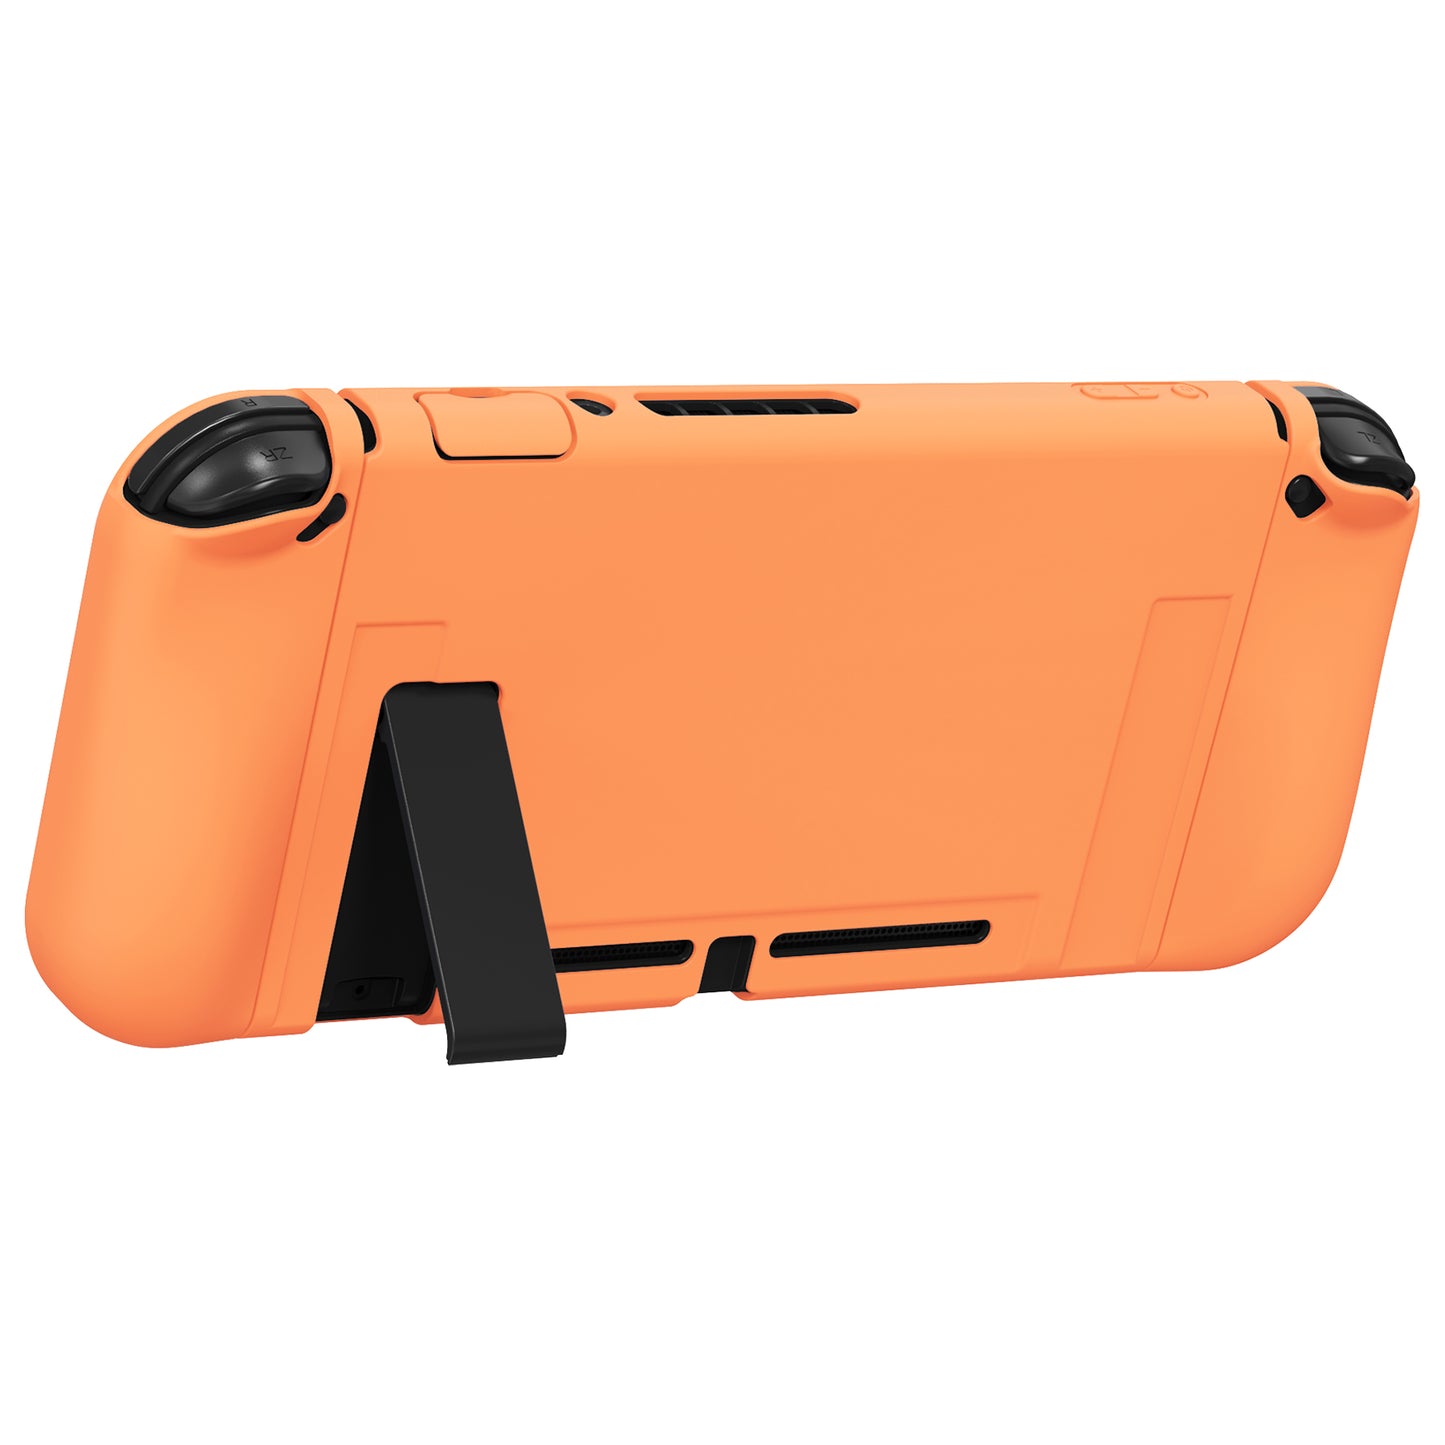 PlayVital ZealProtect Soft TPU Slim Protective Case with Tempered Glass Screen Protector & Thumb Grips & ABXY Direction Button Caps for NS Switch - Apricot Yellow - RNSYM5012